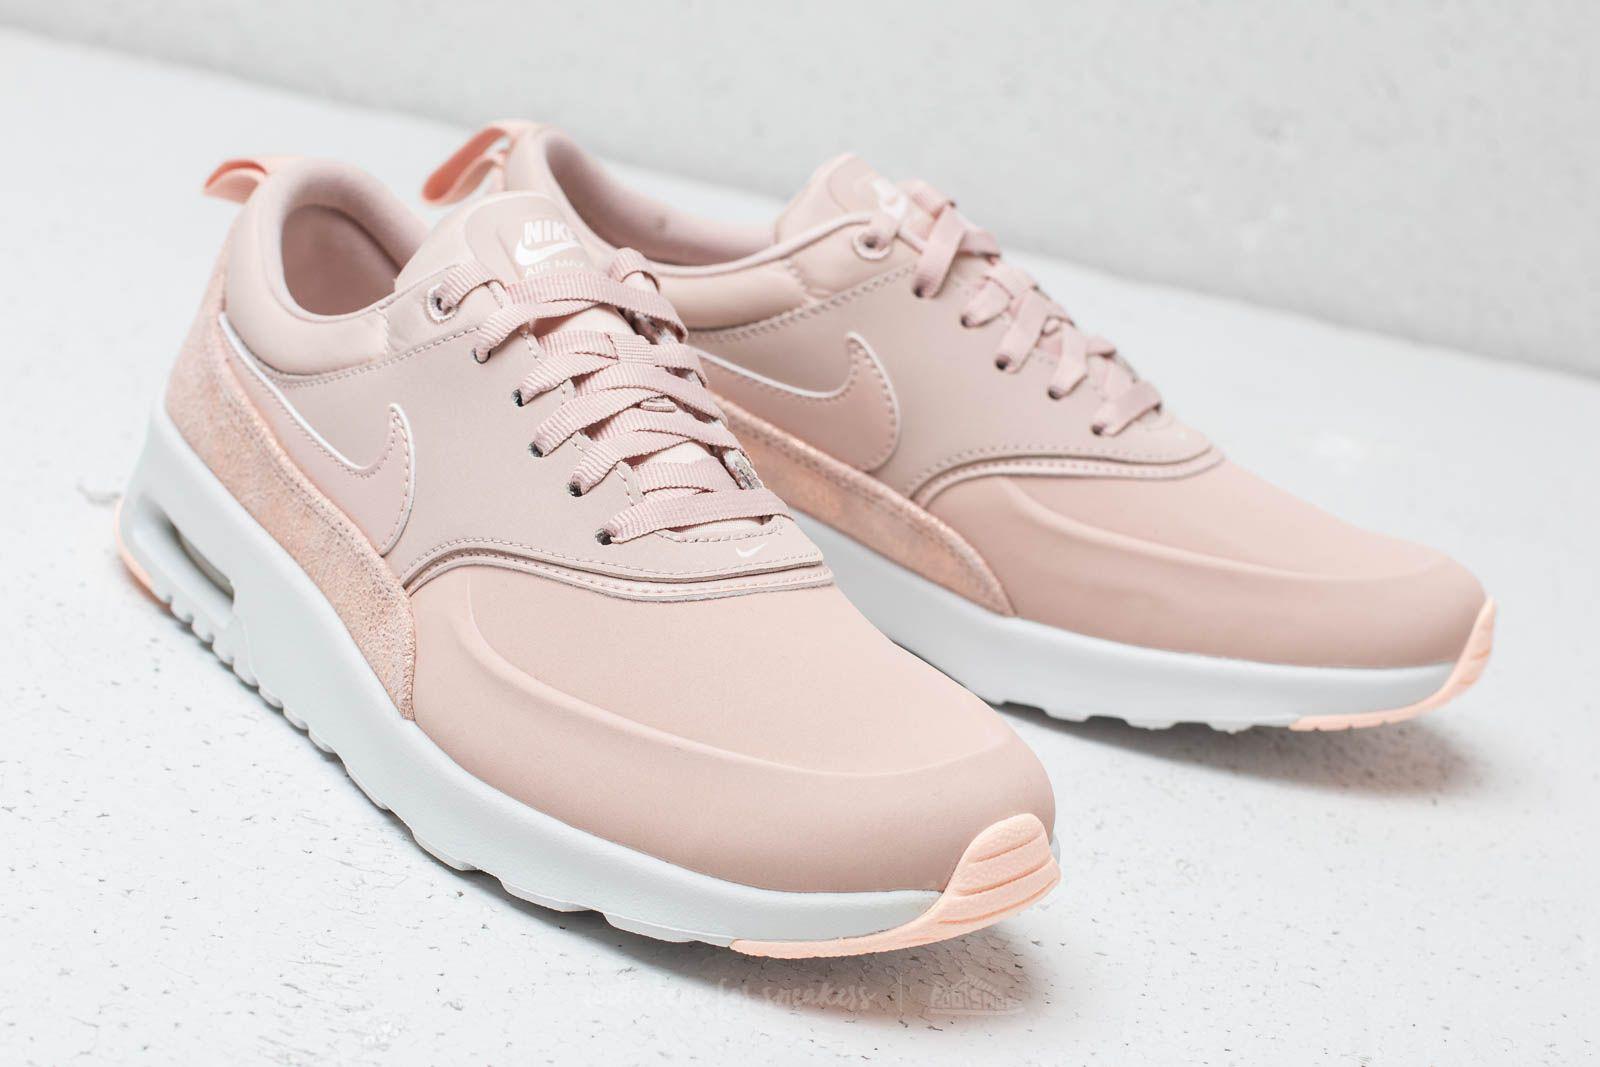 Nike Leather Wmns Air Max Thea Premium Particle Beige/ Particle ...